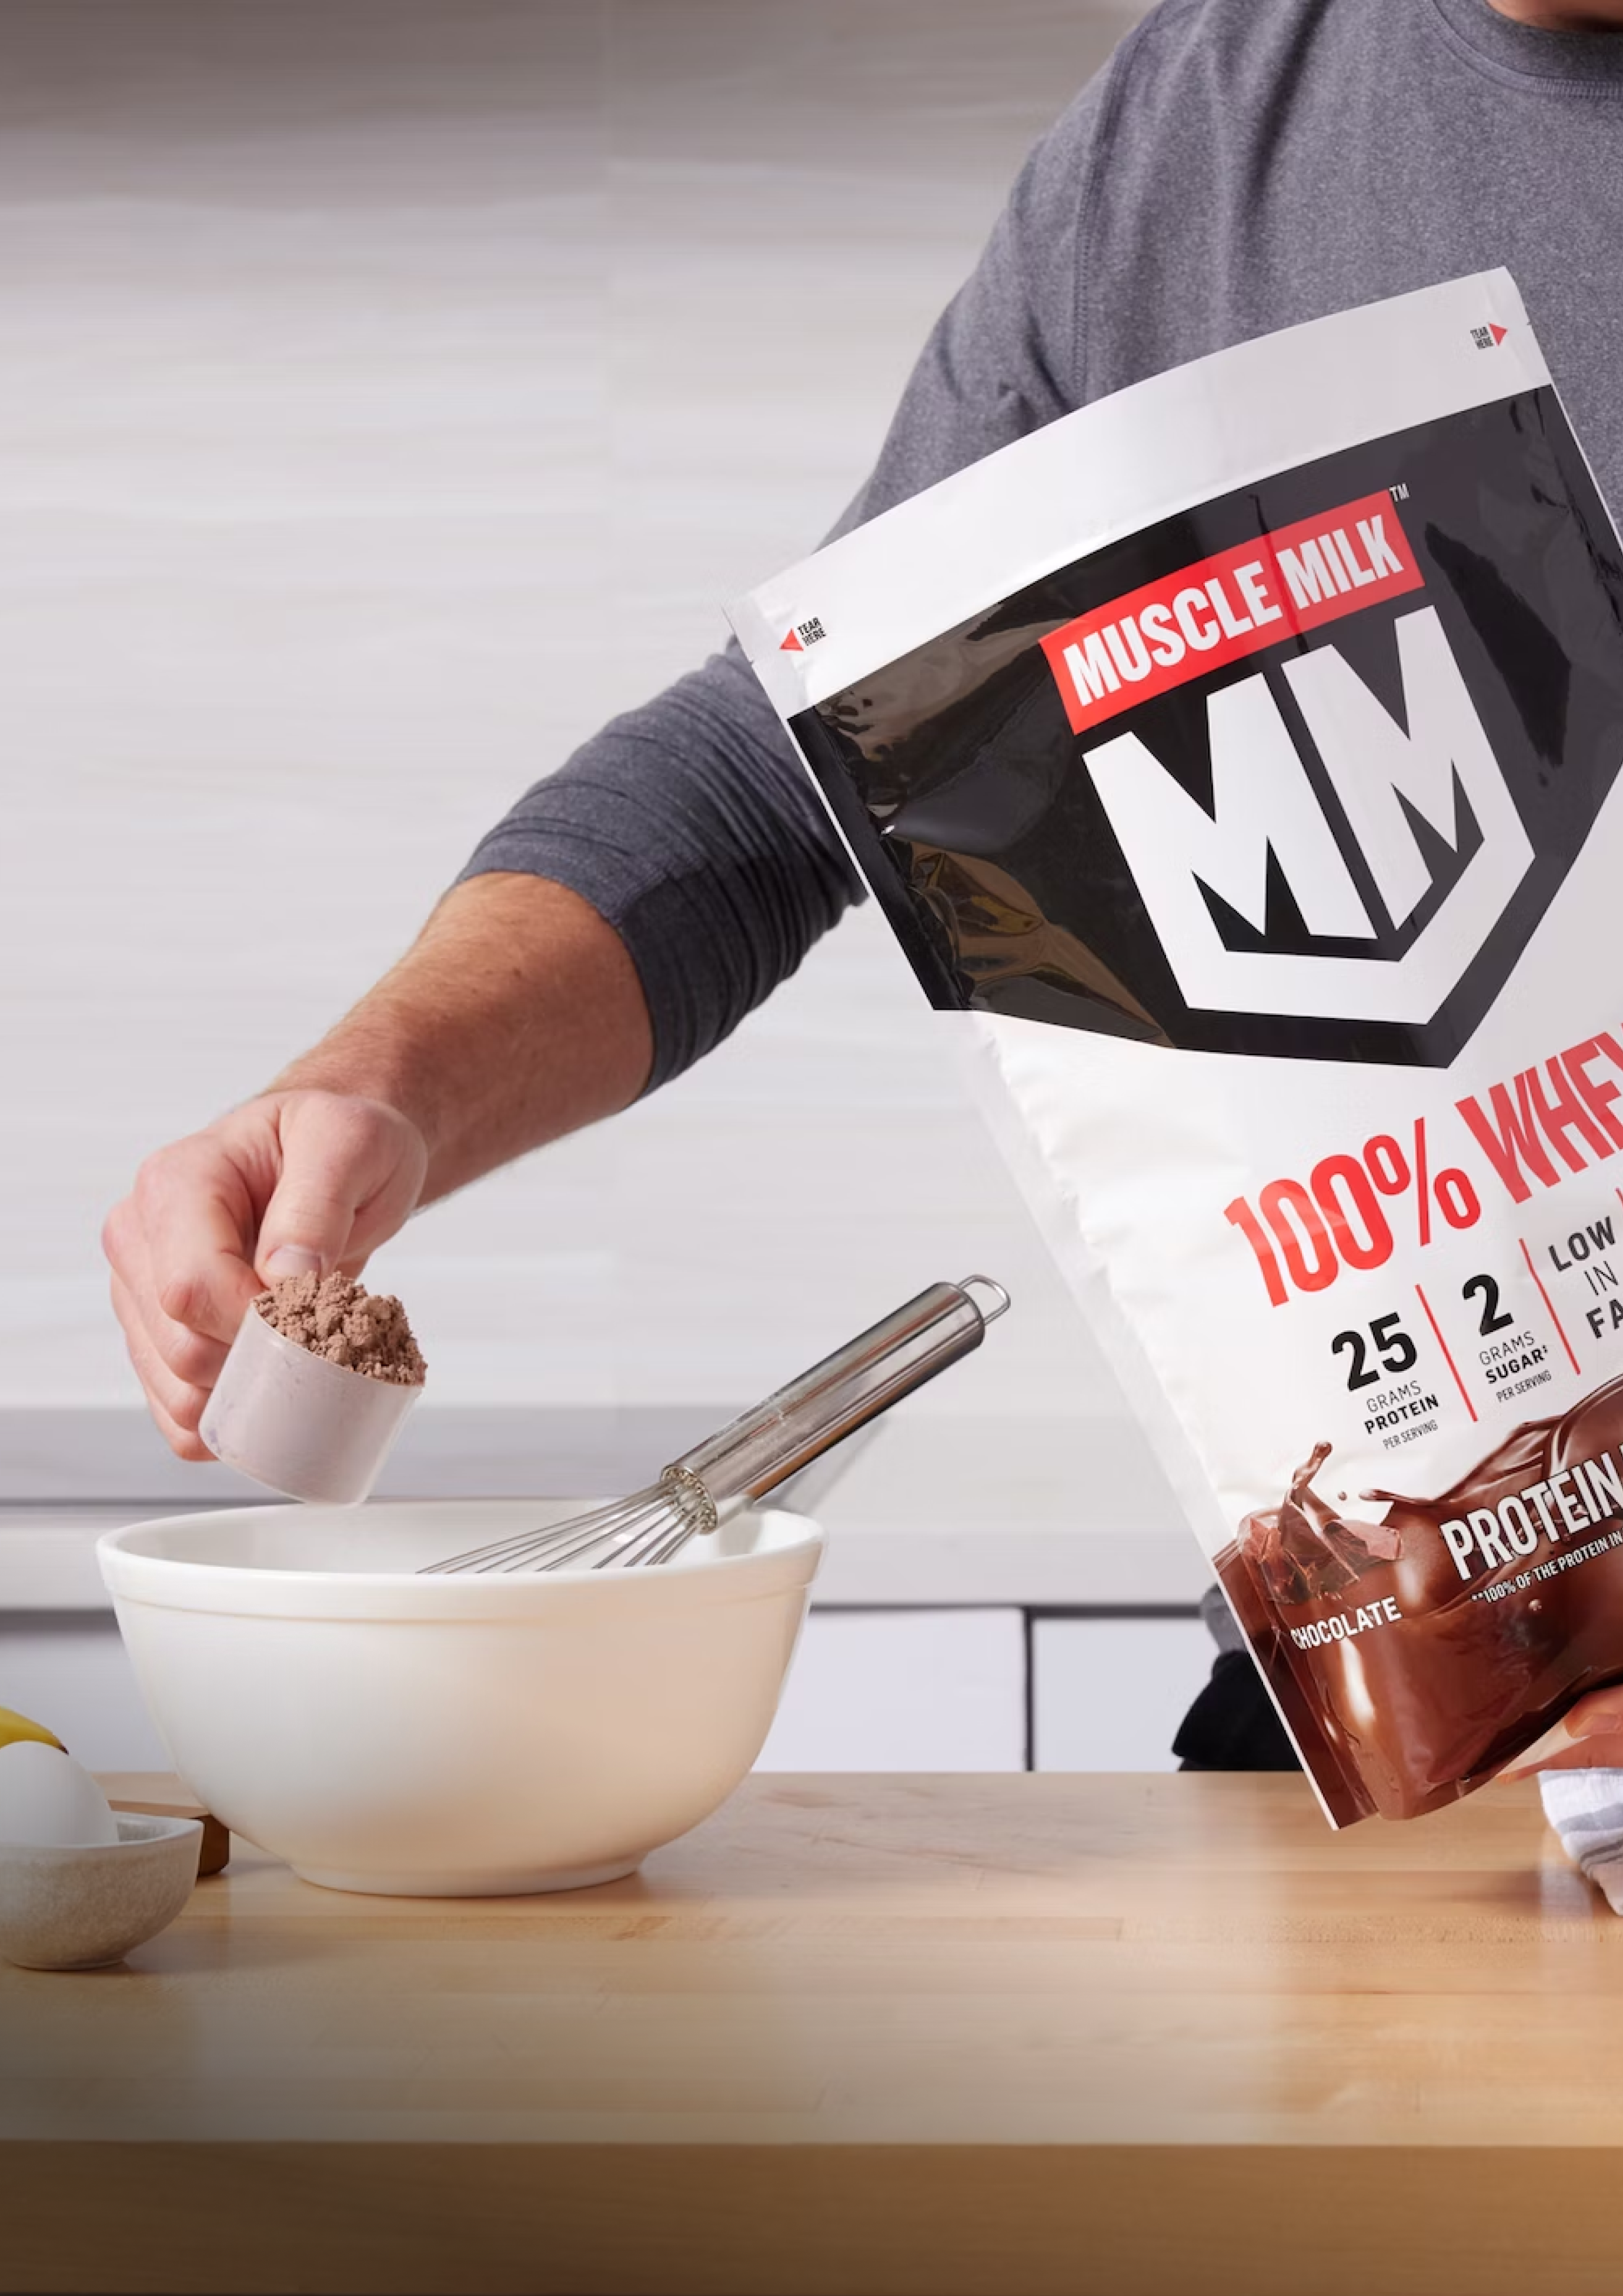 Muscle milk 100% whey protein powder being scooped into bowl